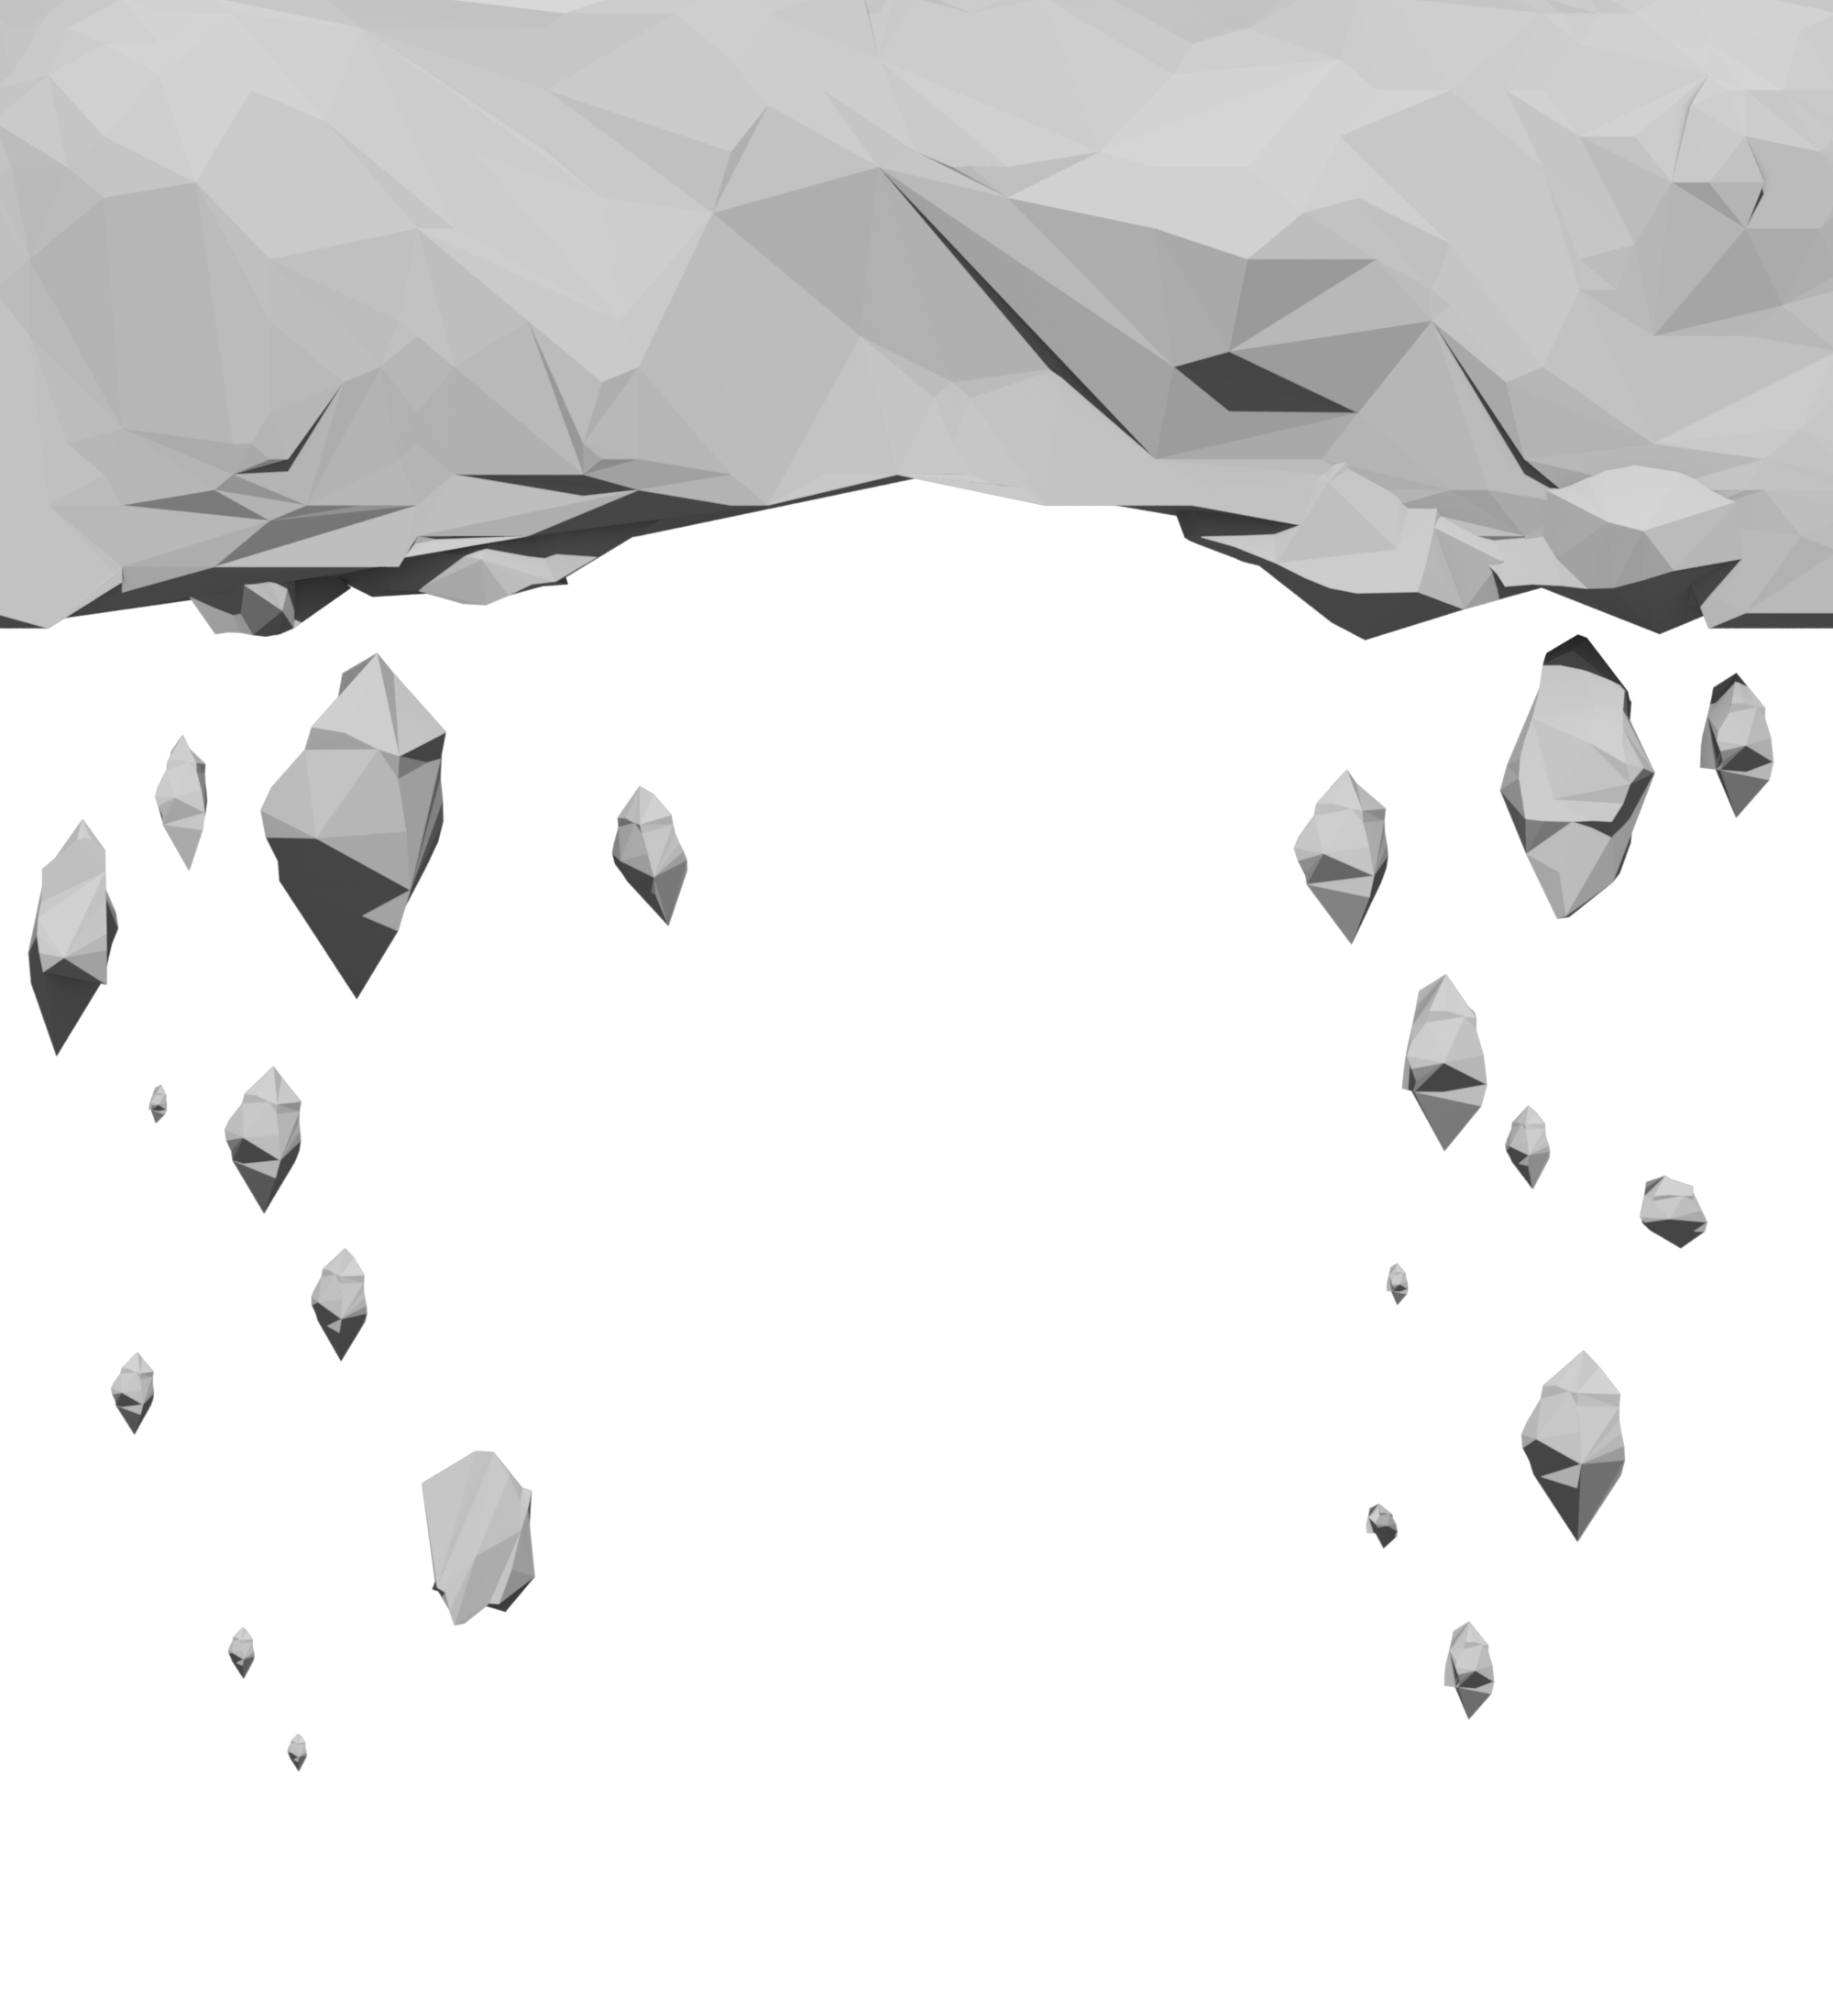 A gray low-poly crumbling header image